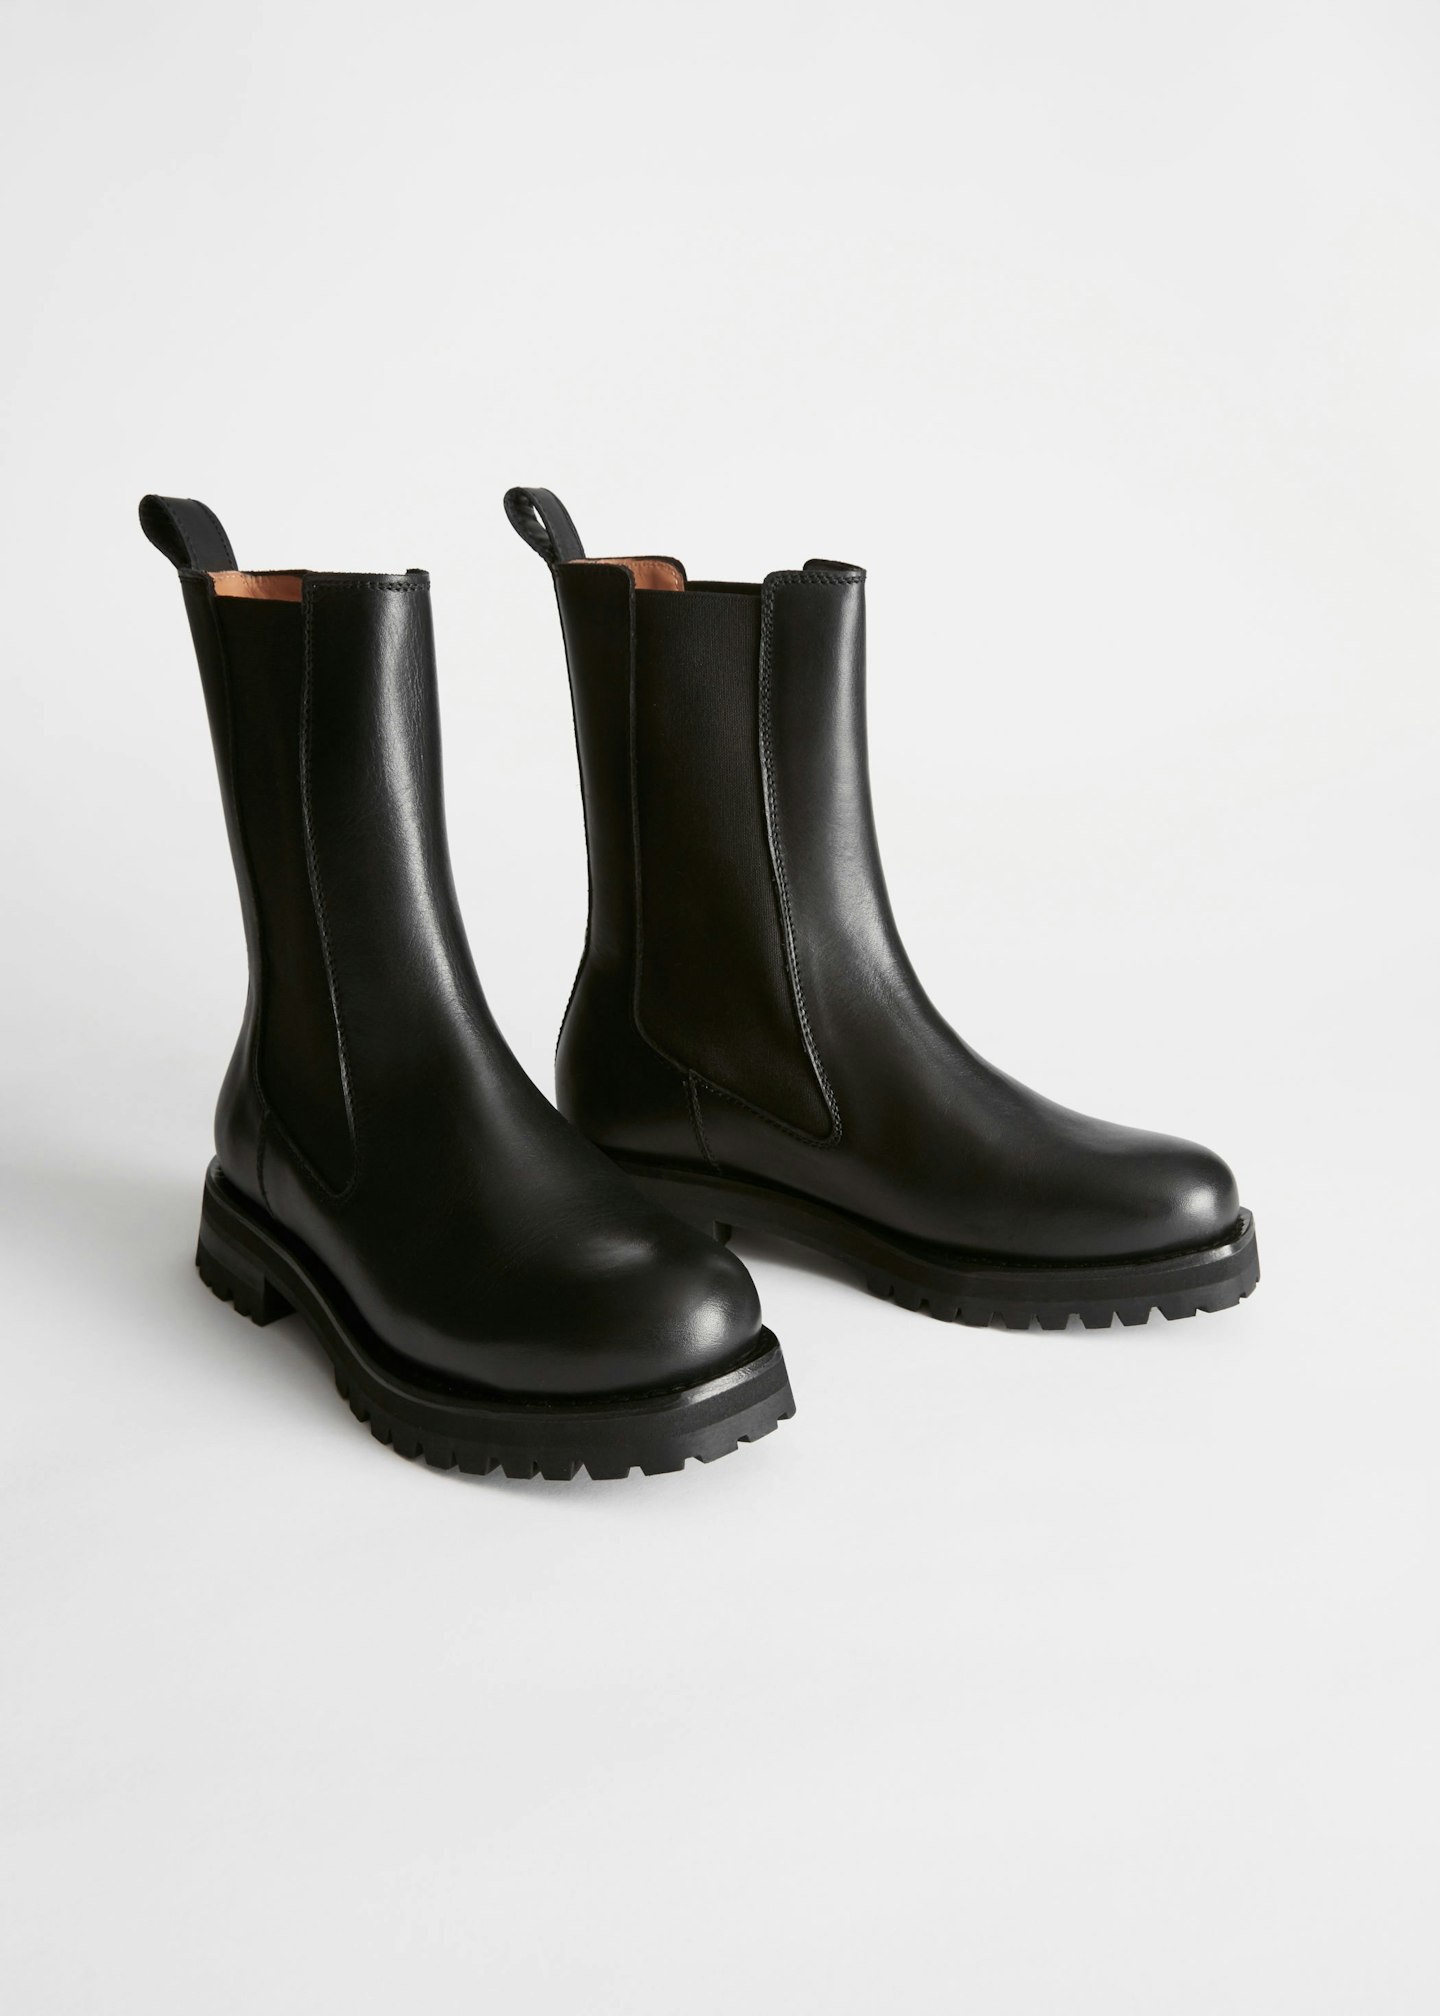 & Other Stories, Chunky Sole Leather Chelsea Boots, £165